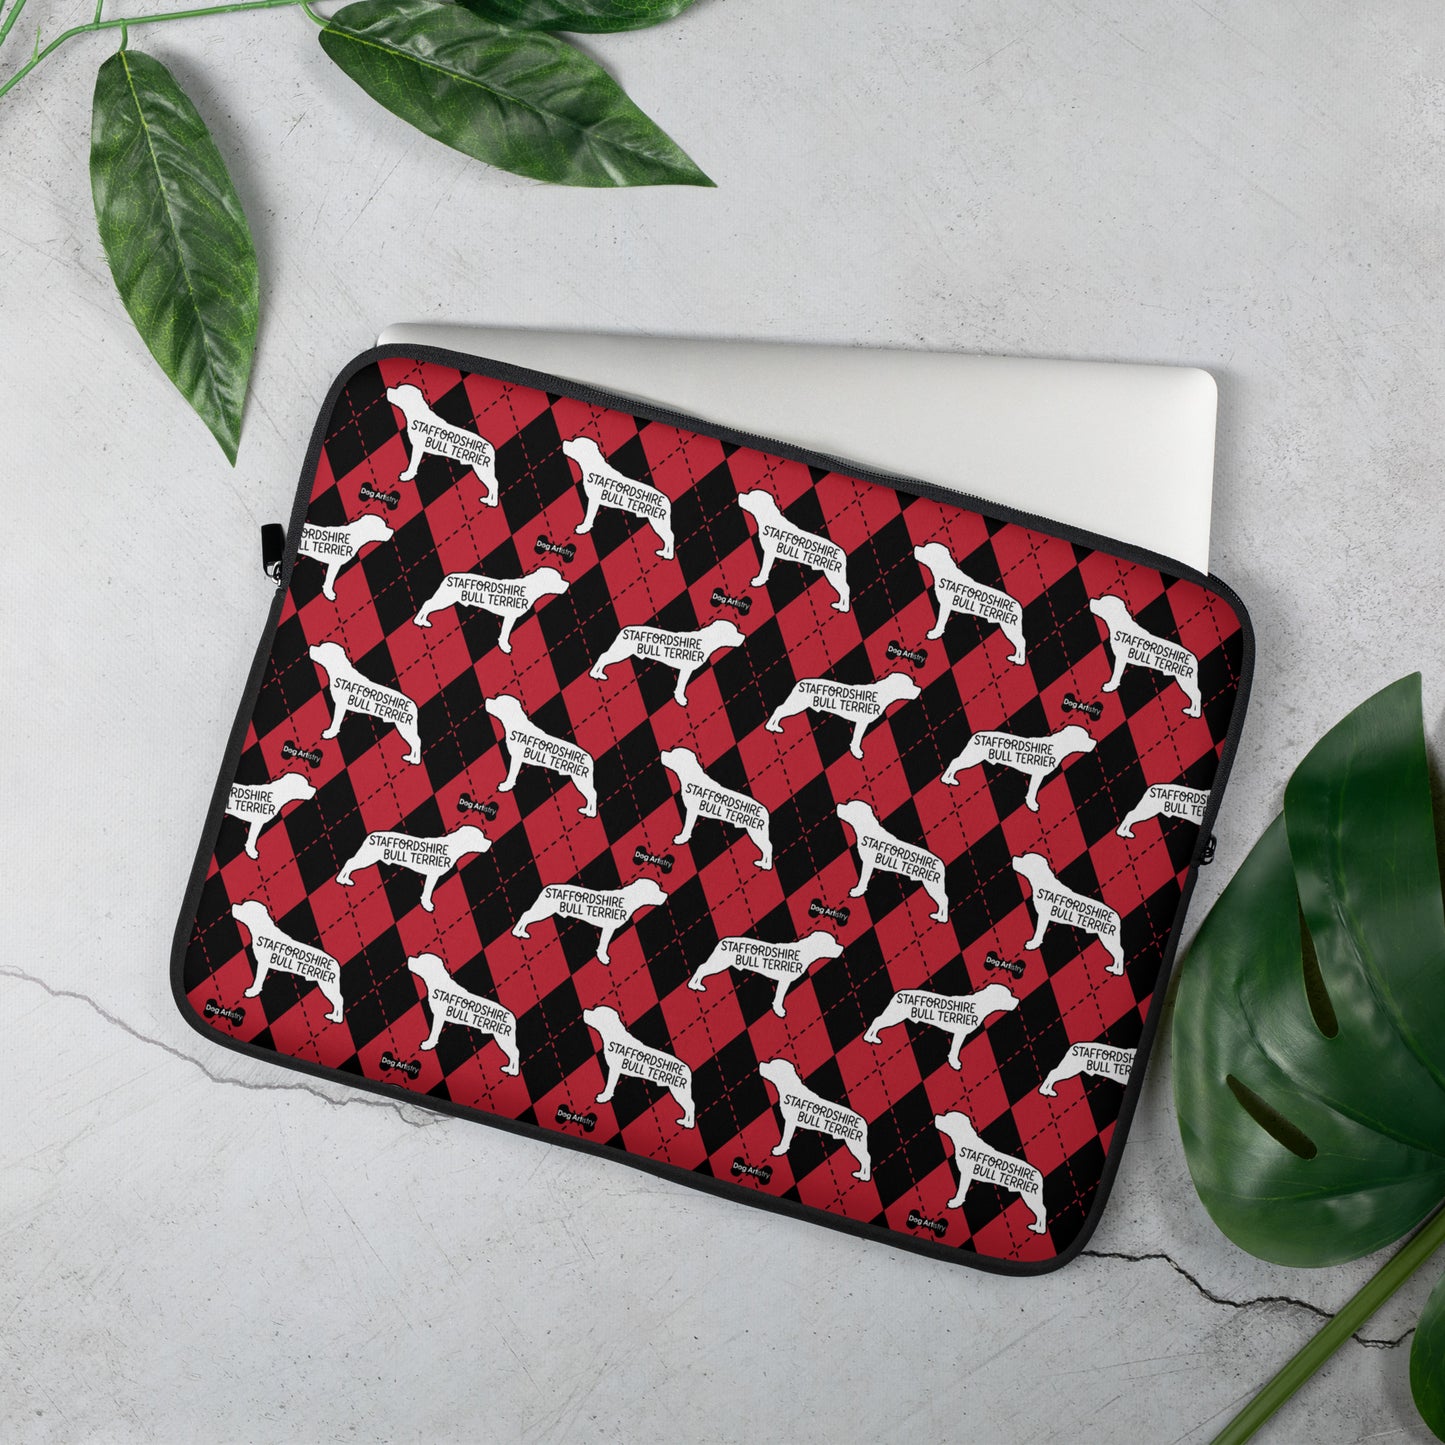 Staffordshire Bull Terrier Argyle Red and Black Laptop Sleeve